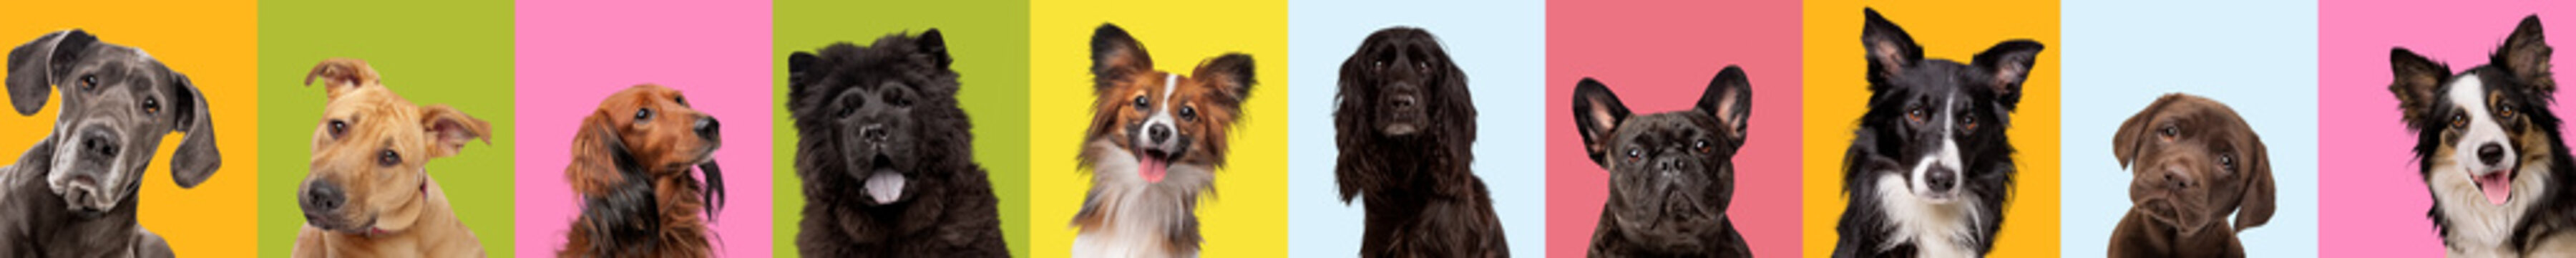 Collage of ten different dog breeds on multicolored bright background